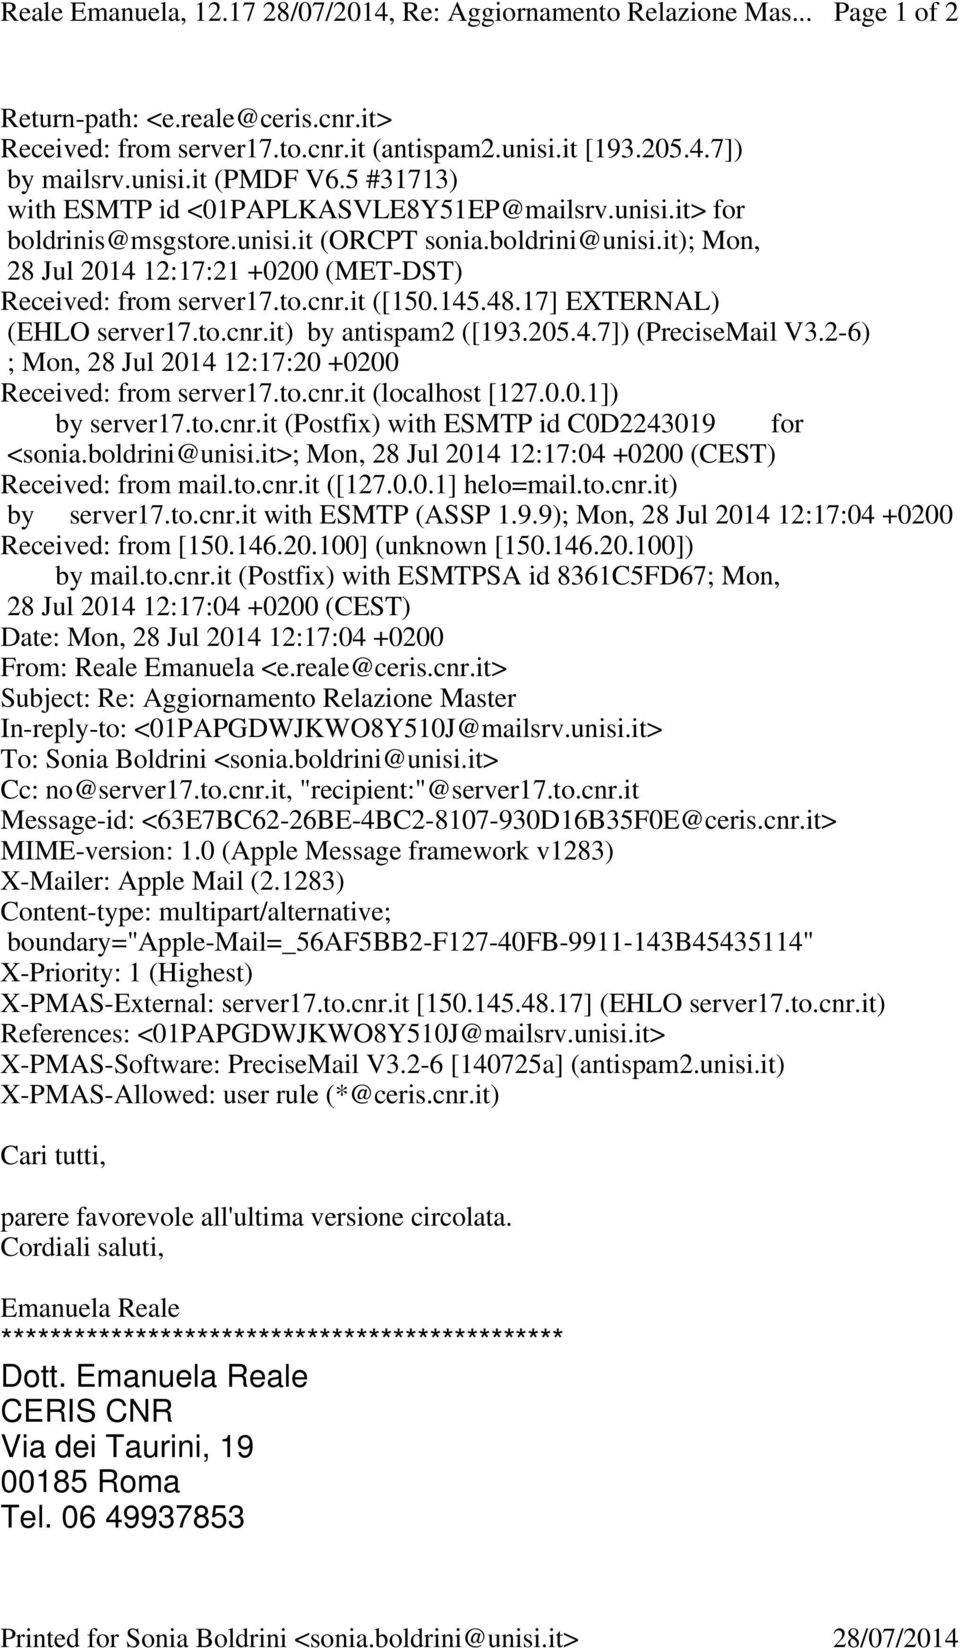 it ([150.145.48.17] ETERNAL) (EHLO server17.to.cnr.it) by antispam2 ([193.205.4.7]) (PreciseMail V3.2-6) ; Mon, 28 Jul 2014 12:17:20 +0200 Received: from server17.to.cnr.it (localhost [127.0.0.1]) by server17.